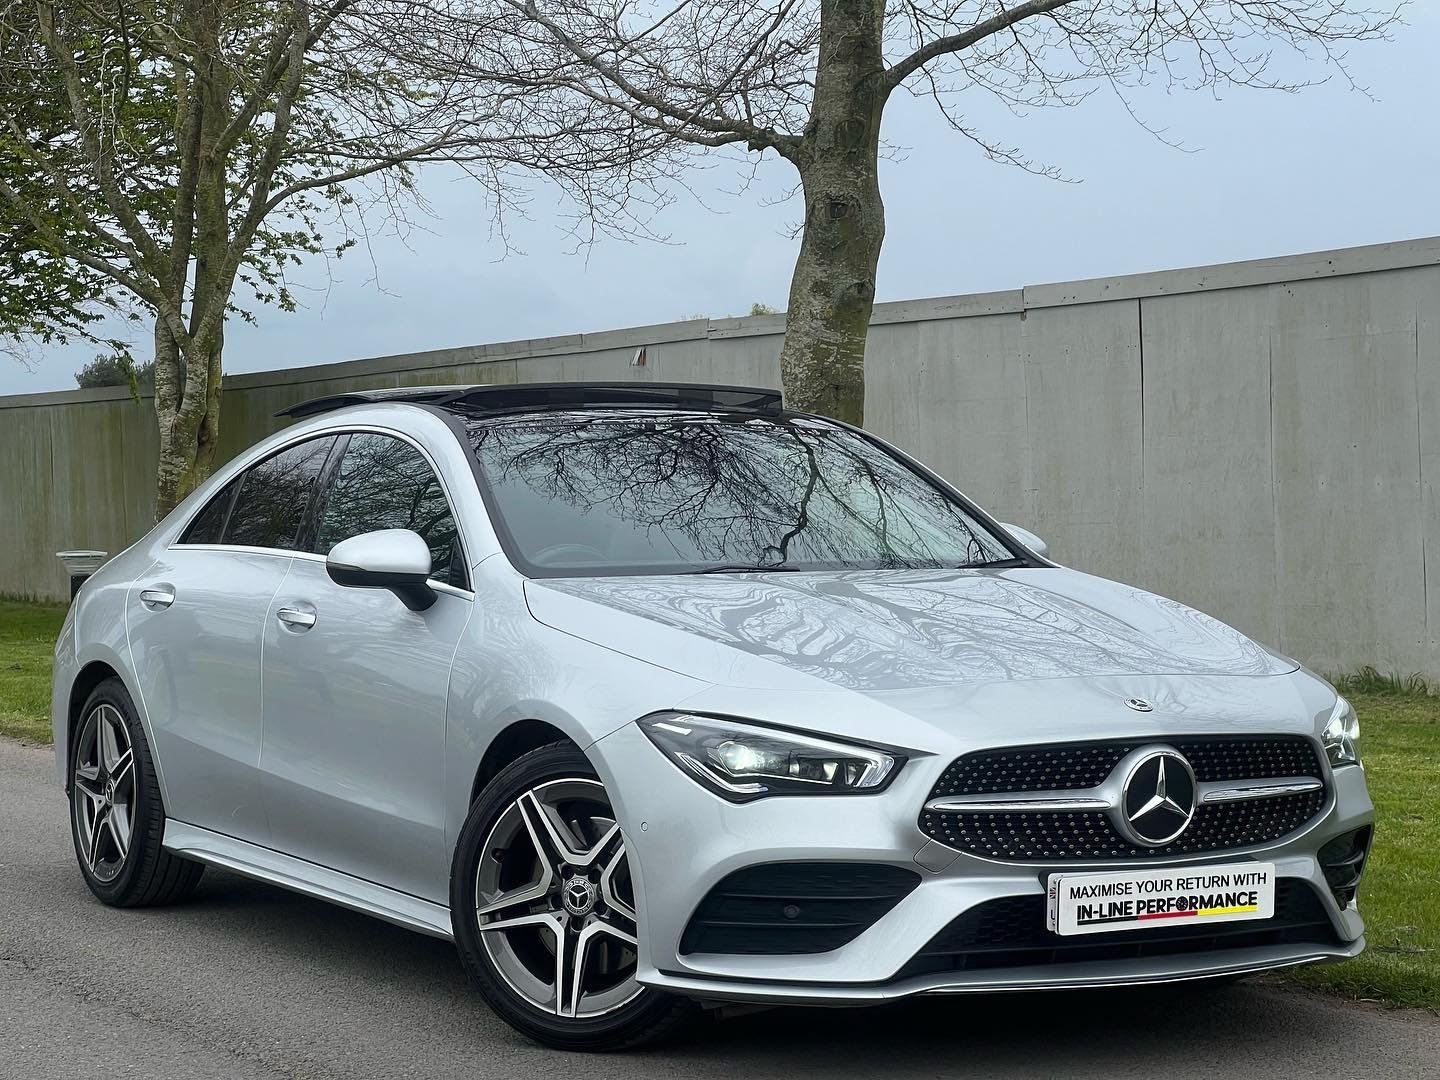 Here At IN-LINE PERFORMANCE We Take Pride And Joy Into Supplying You With The Best Of German Engineering . We Are Proud To Present To You This 2020 Mercedes Benz CLA Premium Plus Finished In A Desirable Glacier Silver With  Black Leather Interior.

W